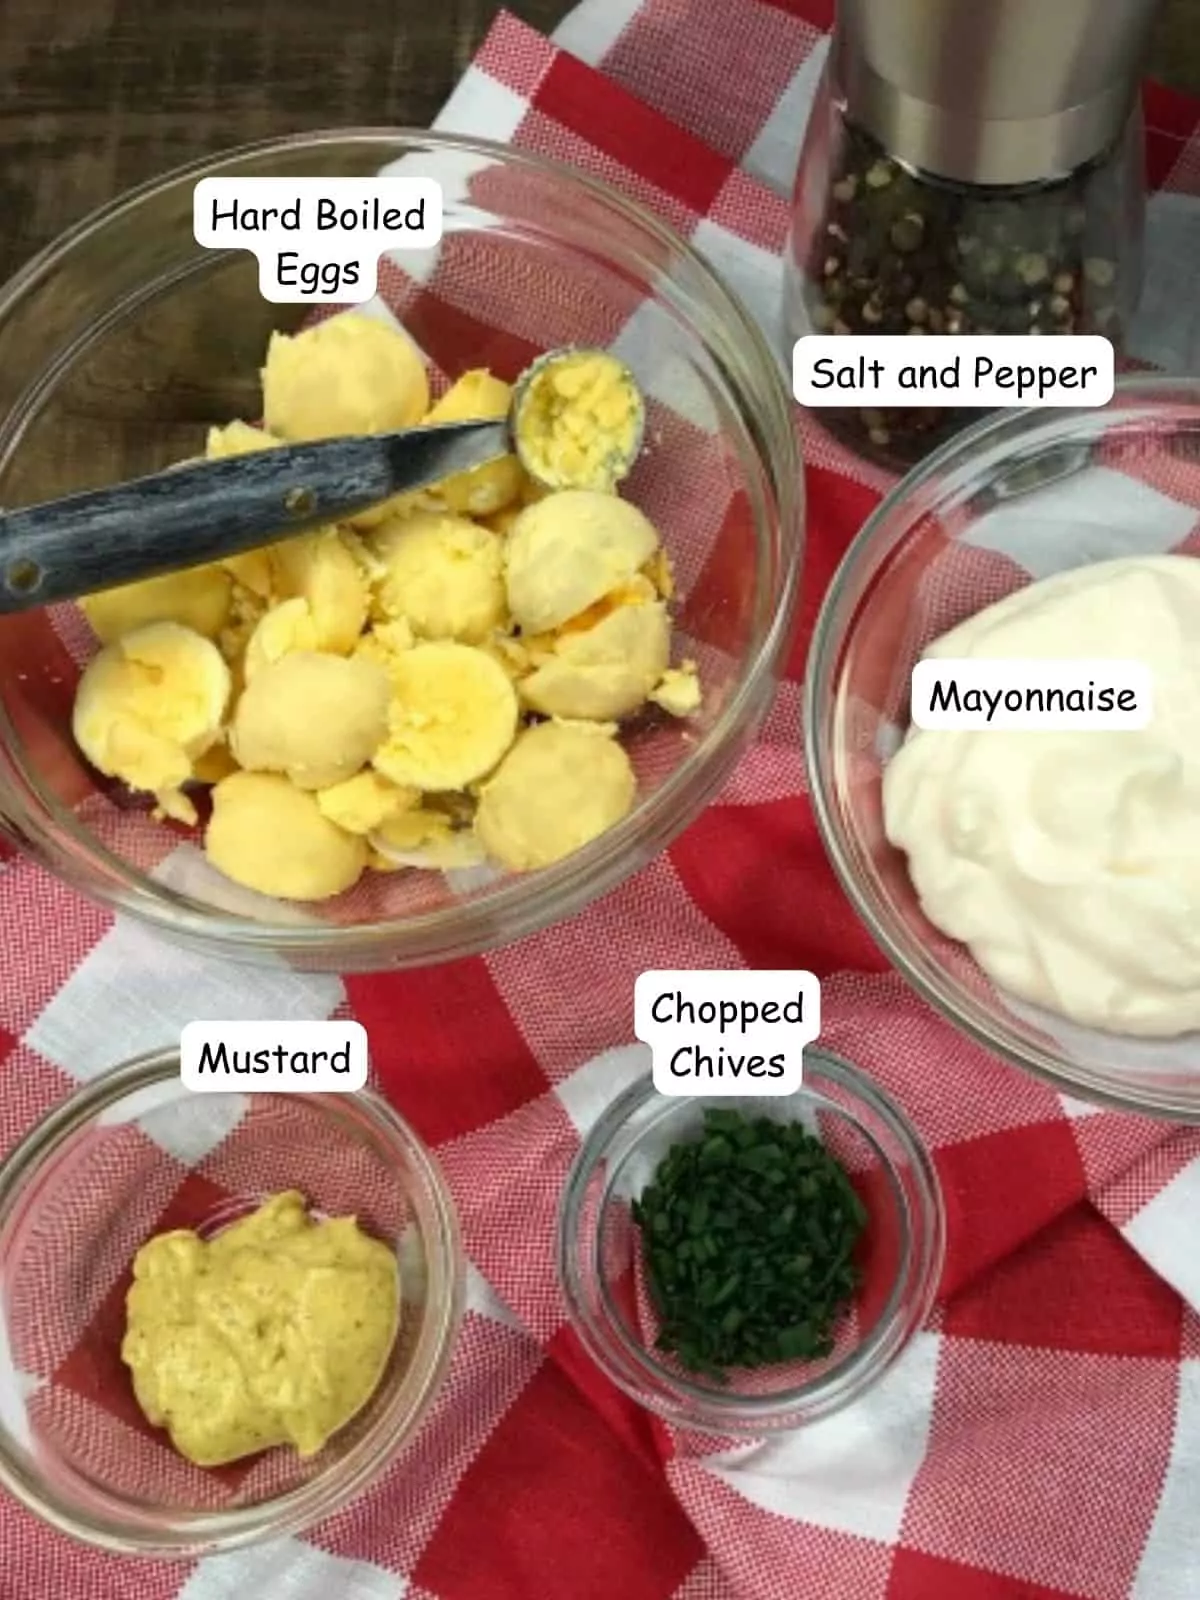 Ingredients for classic deviled eggs.